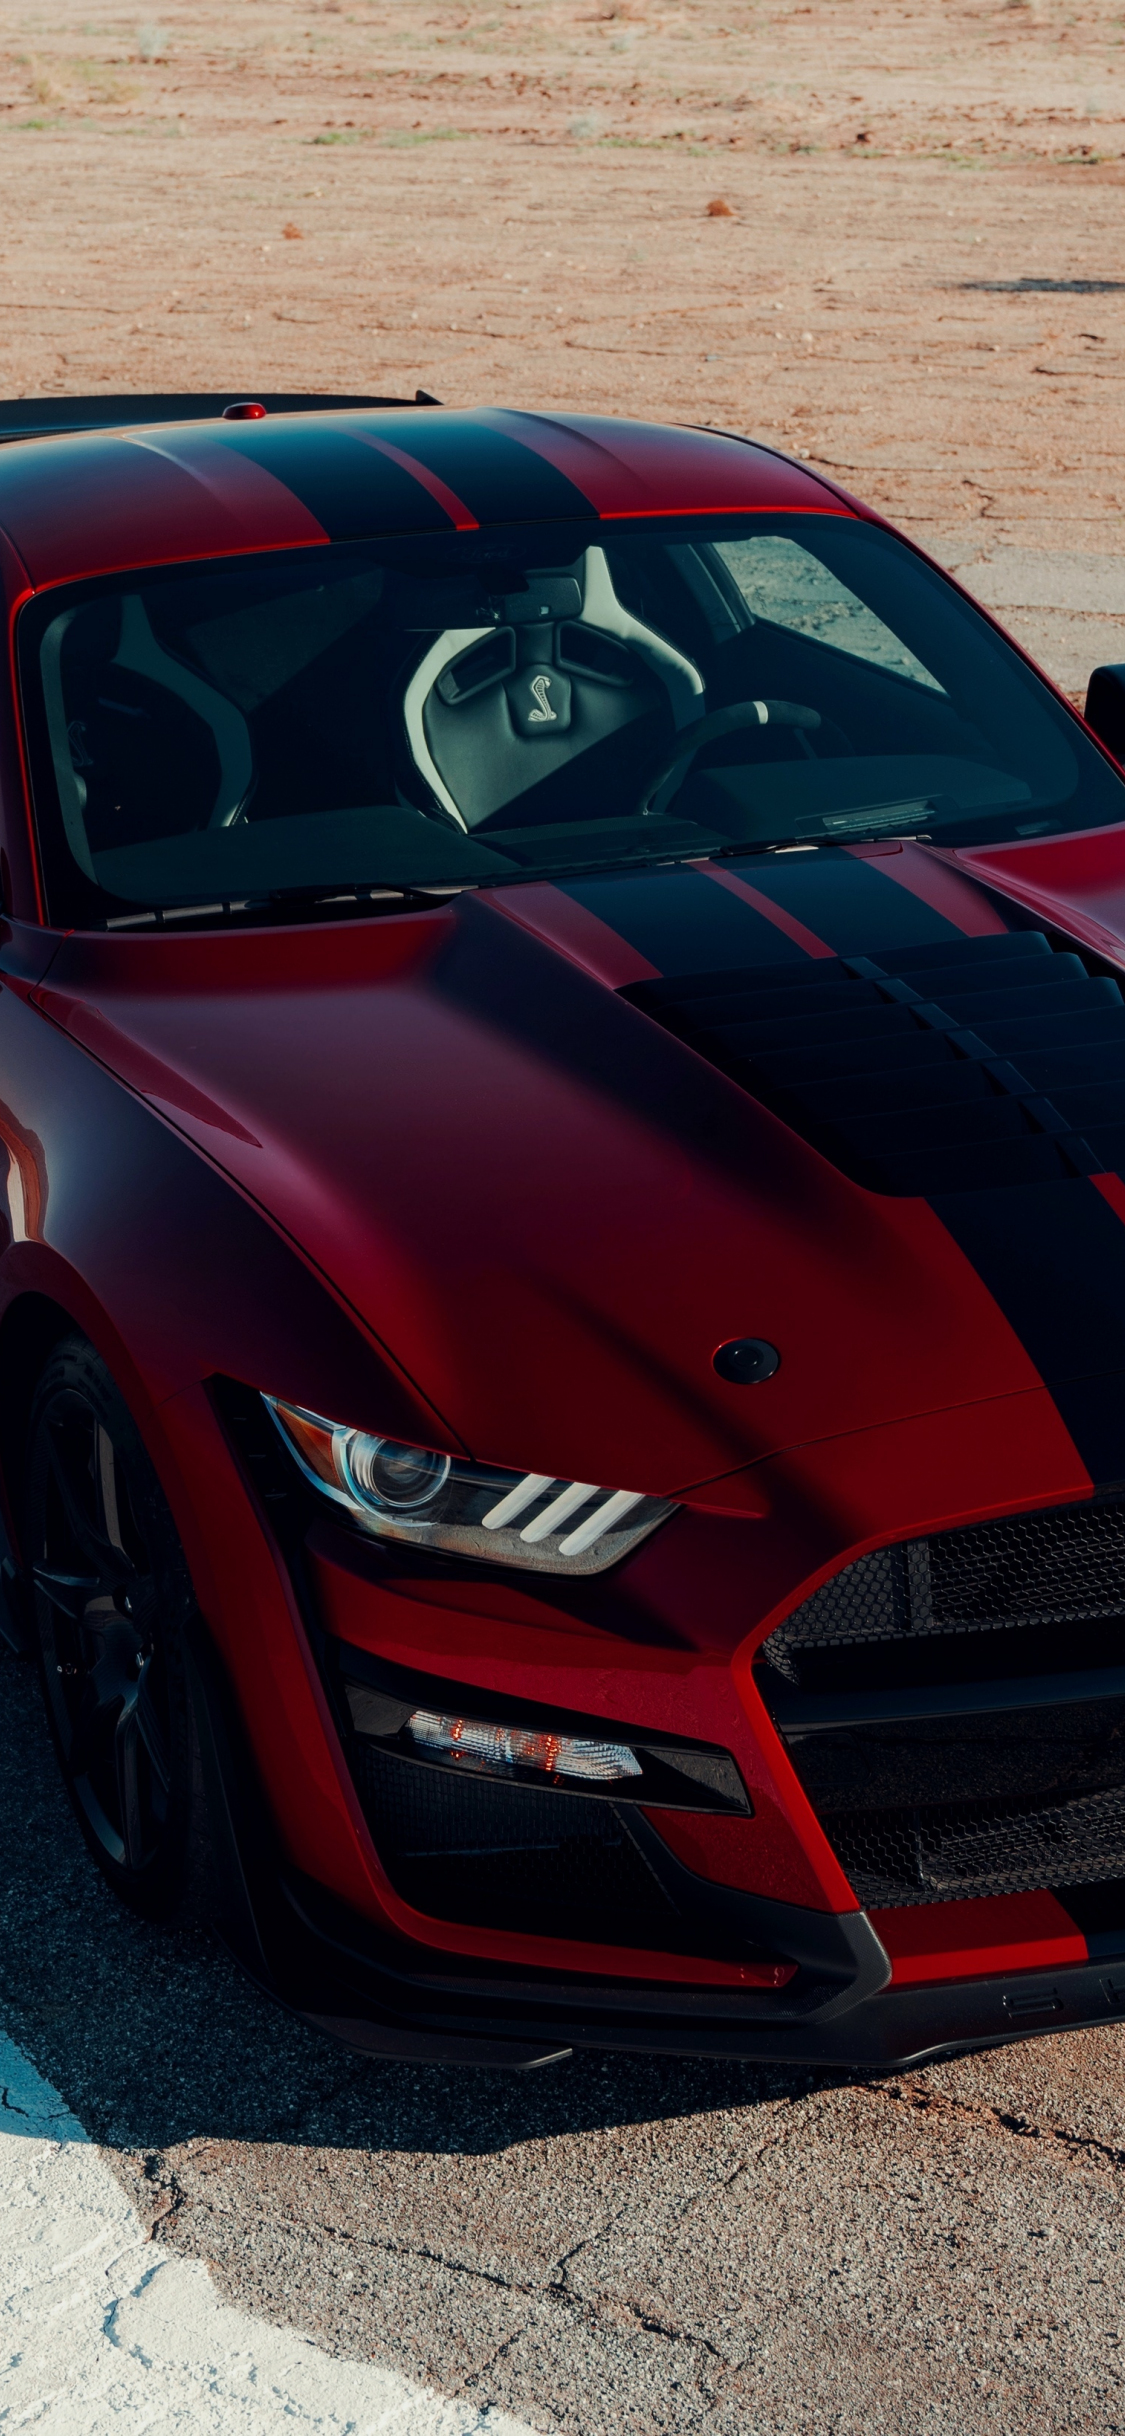 Download Ford Mustang Shelby Gt Muscle Car, Blood Red 1125x2436 Wallpaper, Iphone X, 1125x2436 HD Image, Background, 25182